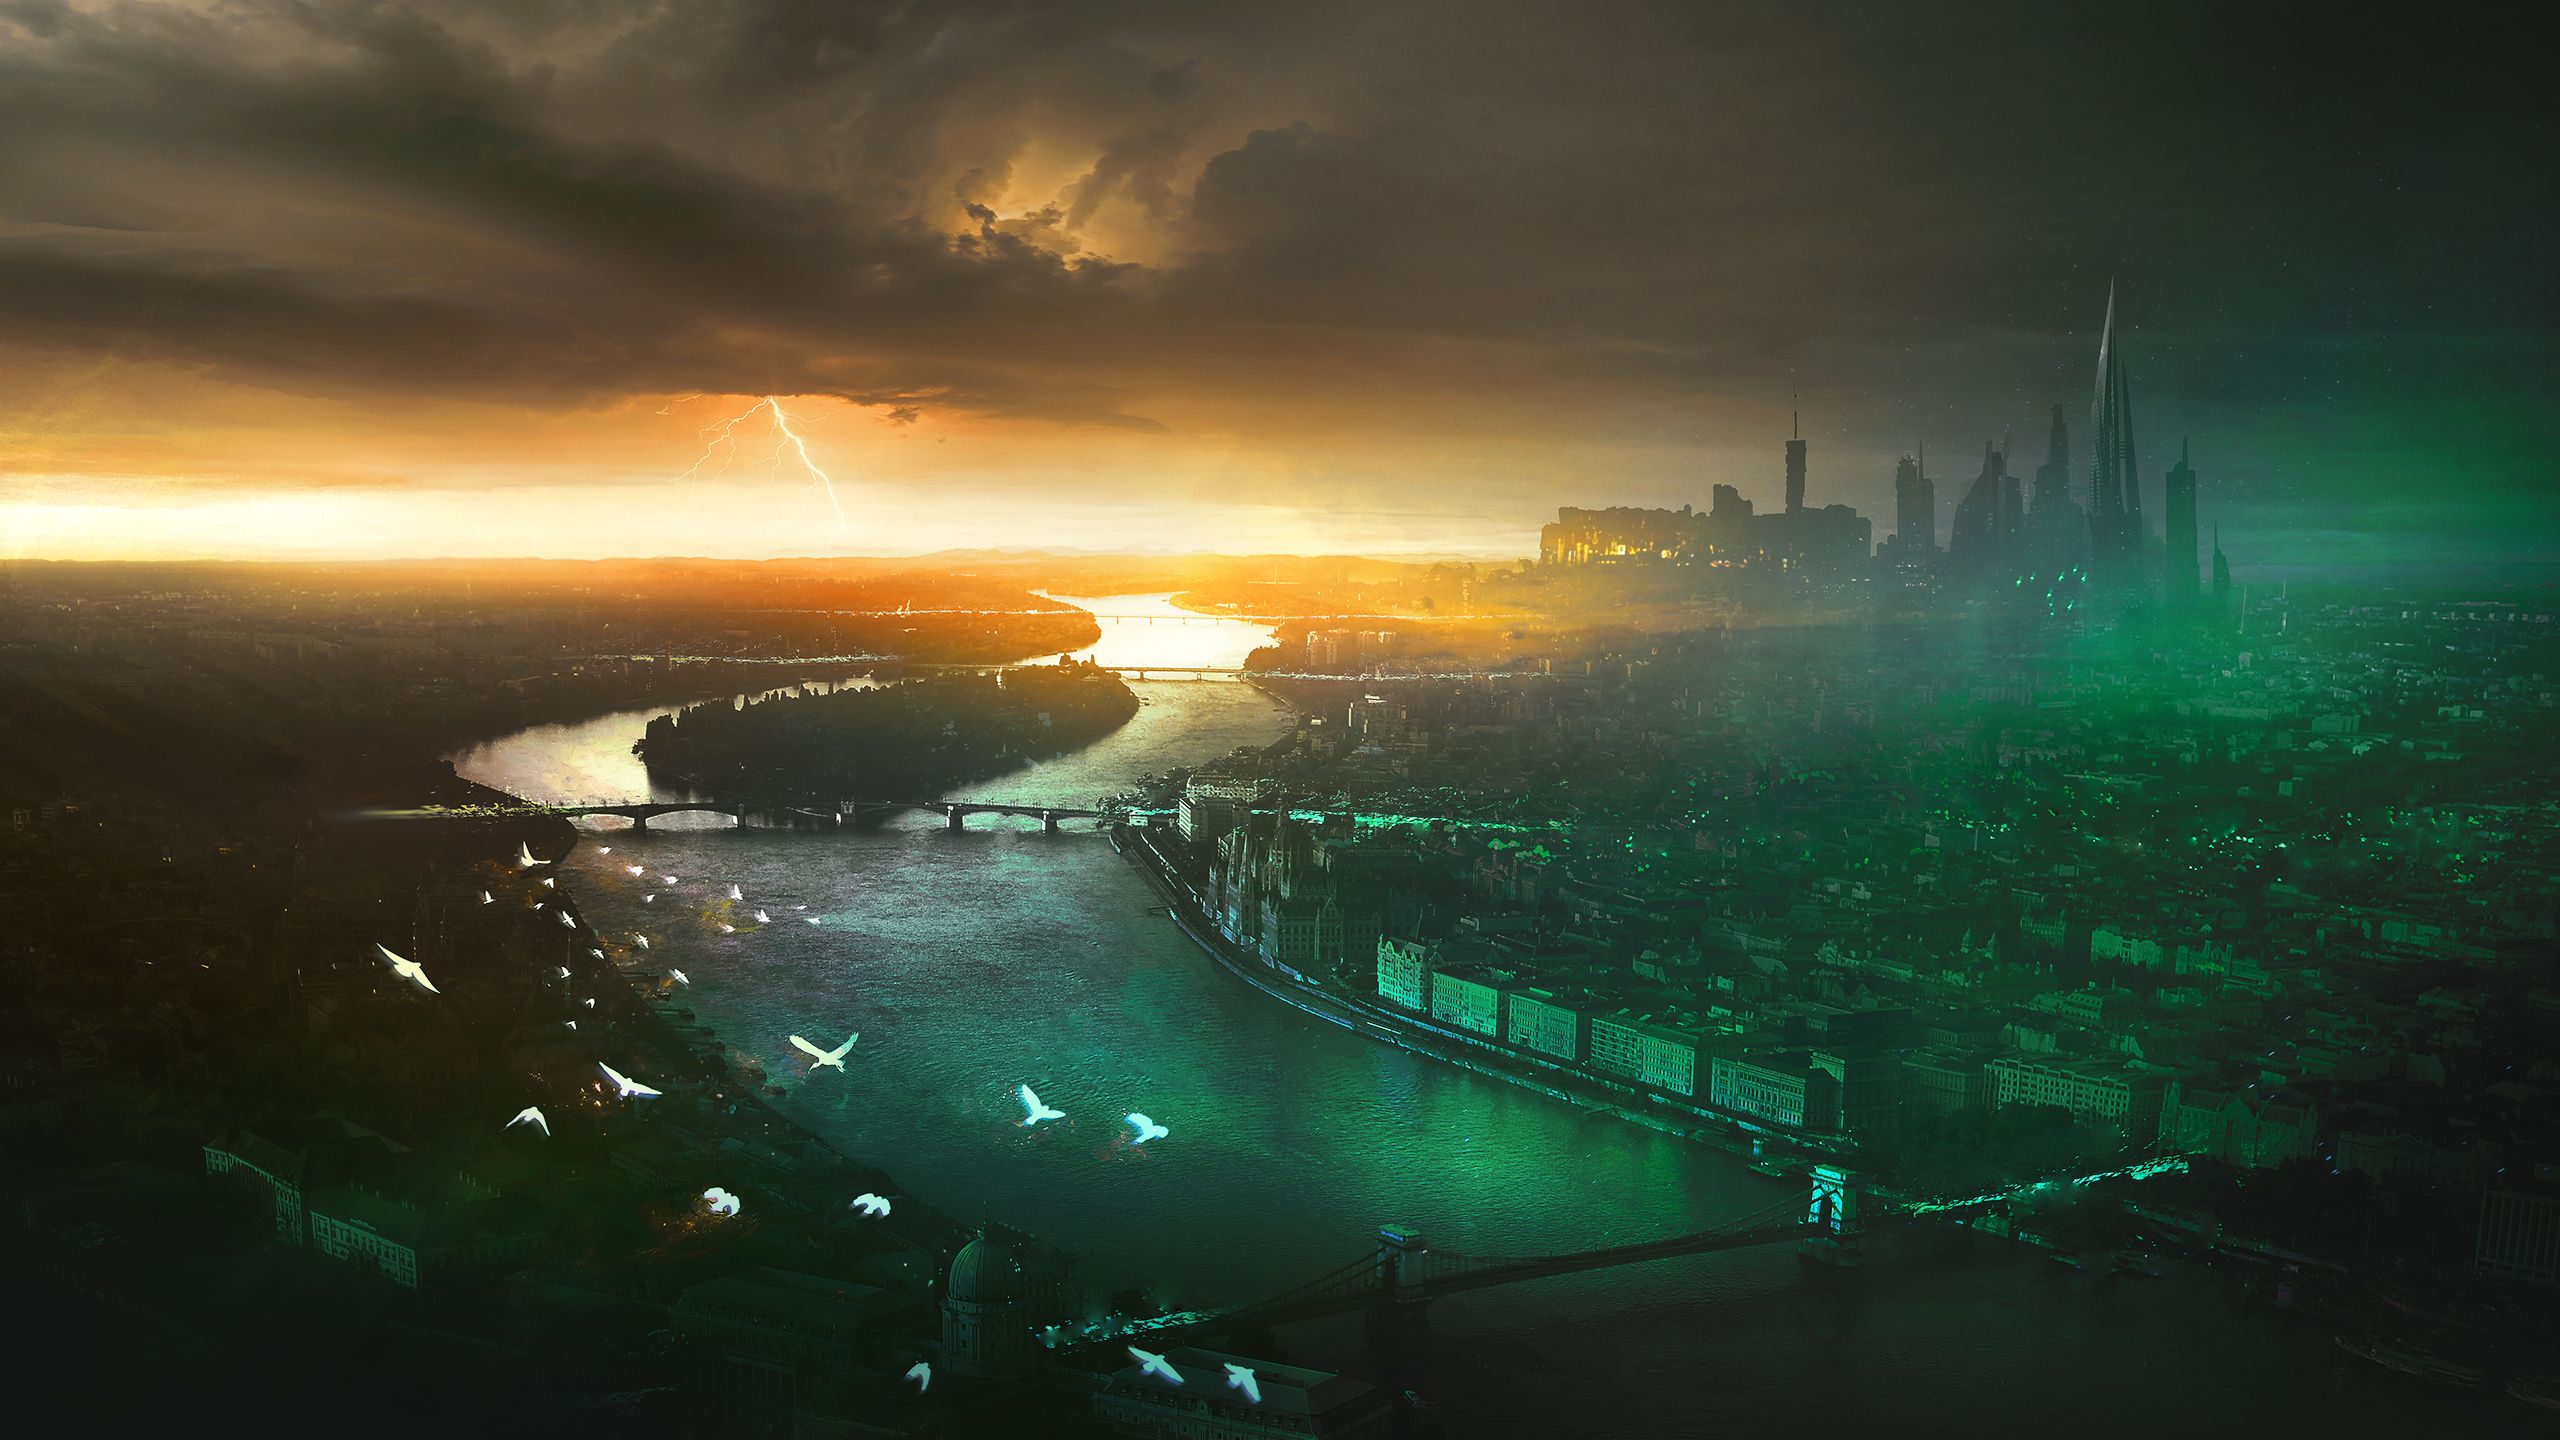 Green City Birds Sky Storm Clouds, HD Artist, 4k Wallpaper, Image, Background, Photo and Picture